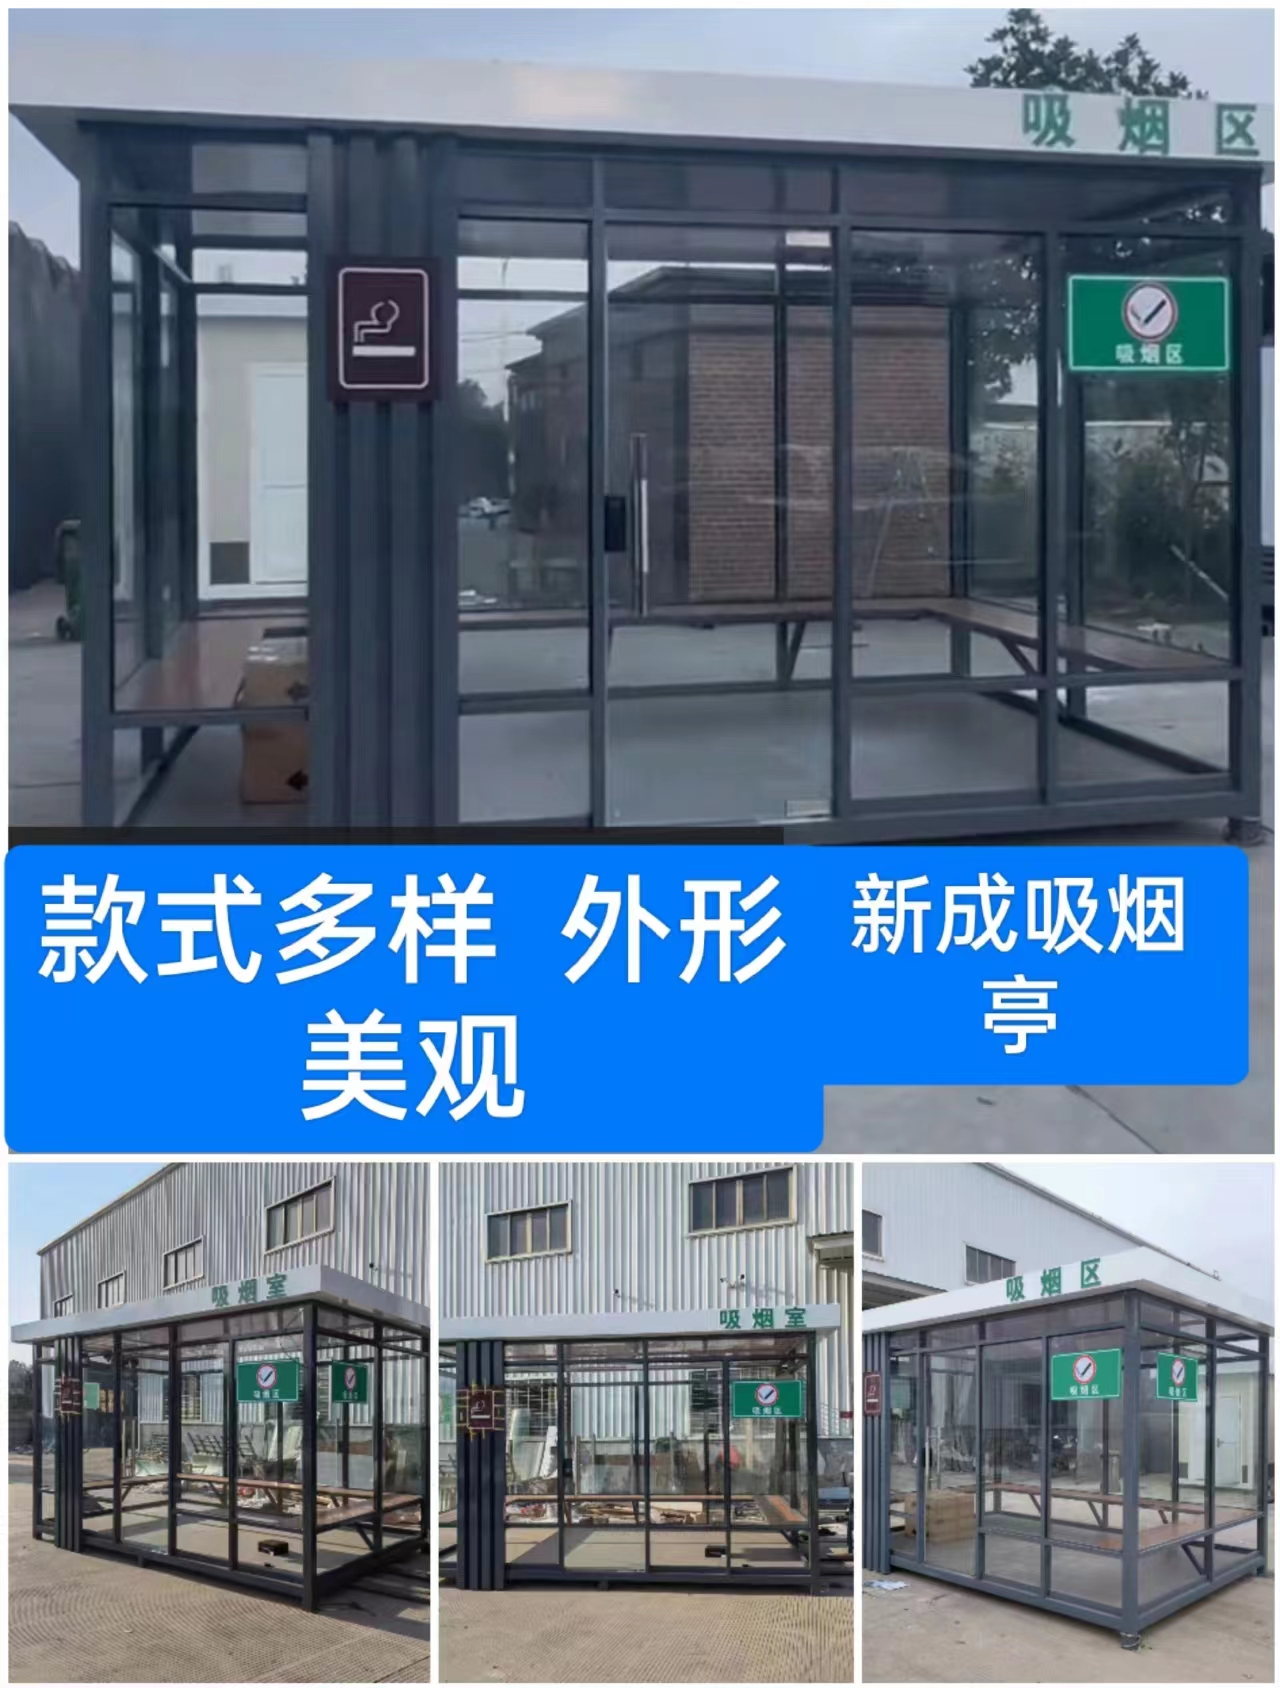 Smoking booth in office building, Smoking room in service area, traffic security sentry box, durable